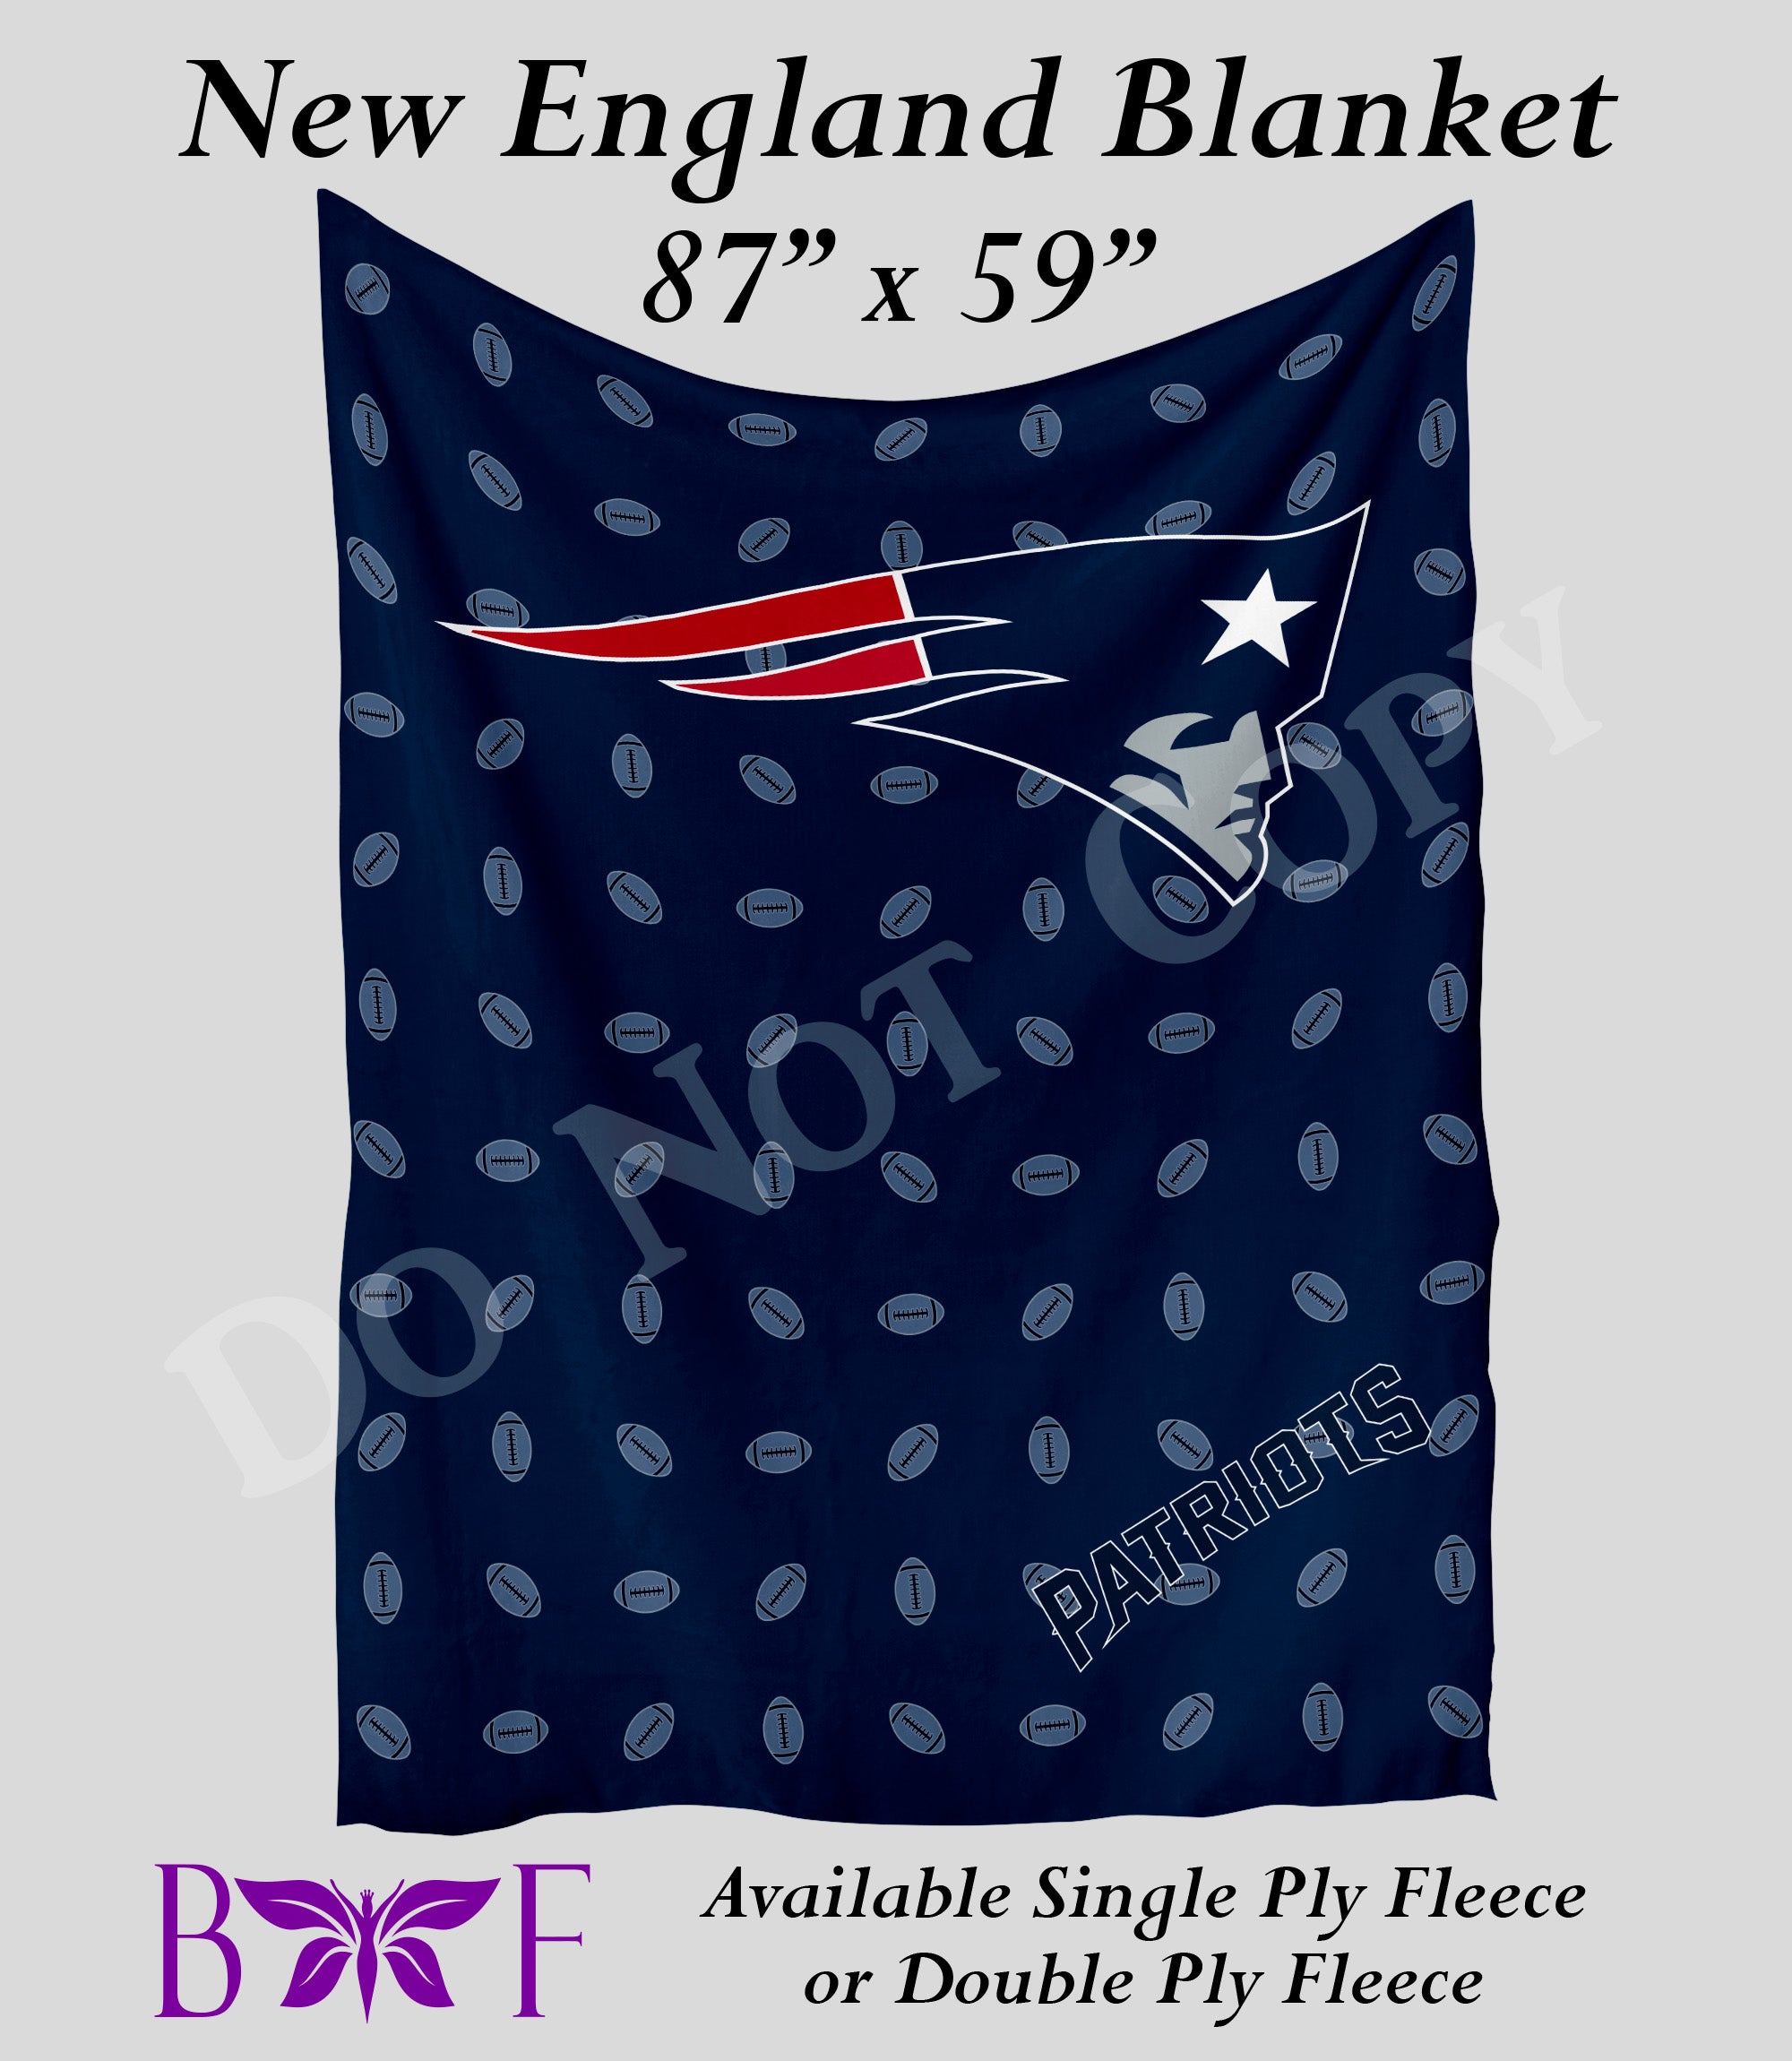 New England 59"x87" soft blanket available without sherpa fleece